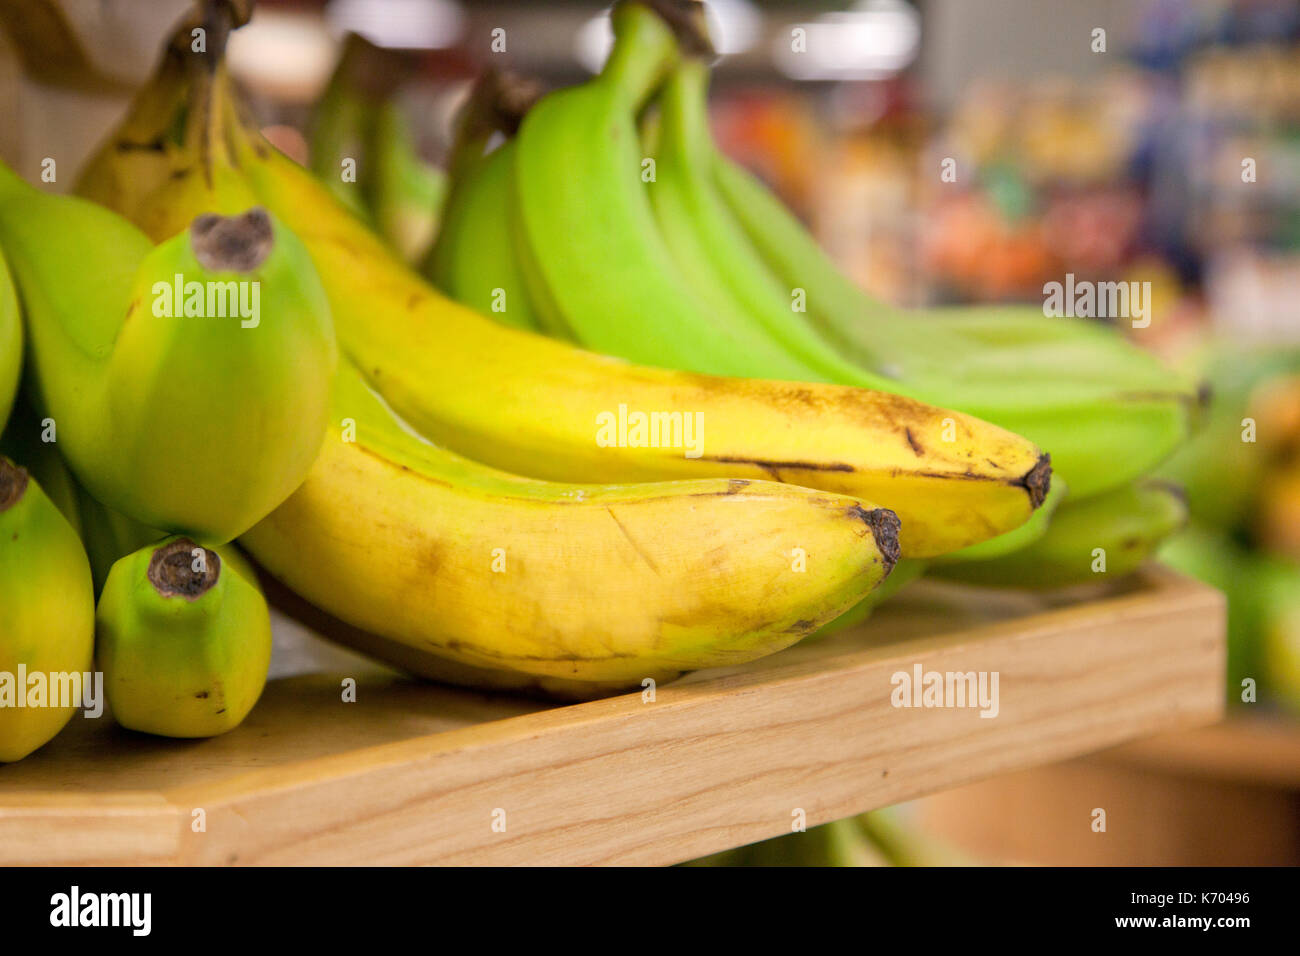 bunches of imperfect yellow and green bananas, in a store on a shelf Stock Photo